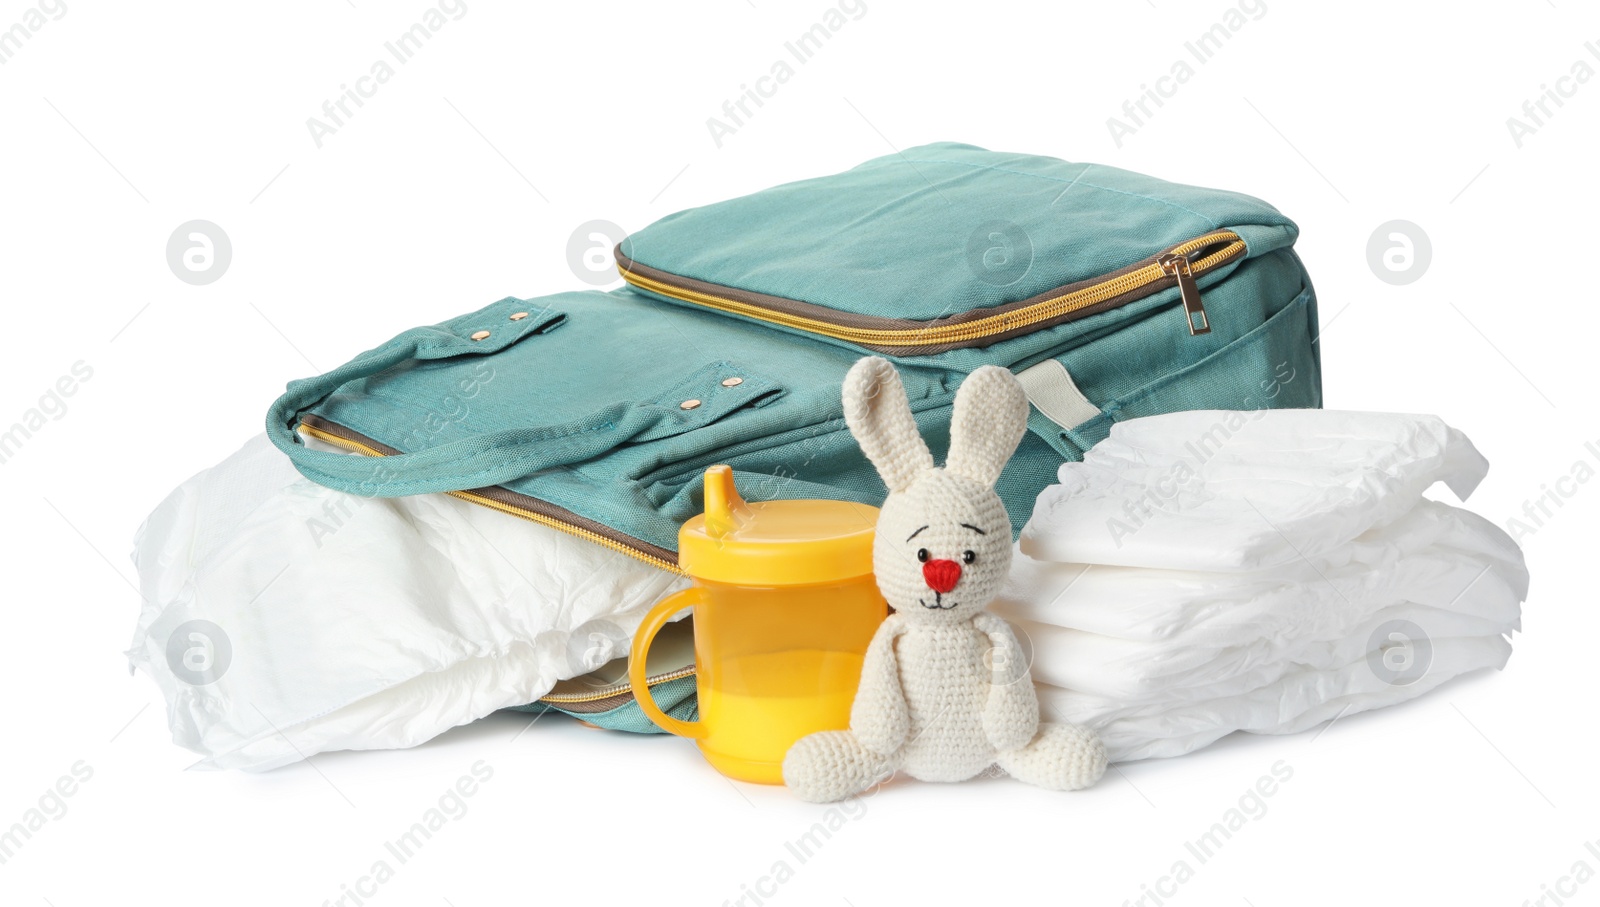 Photo of Backpack with disposable diapers and child's accessories on white background